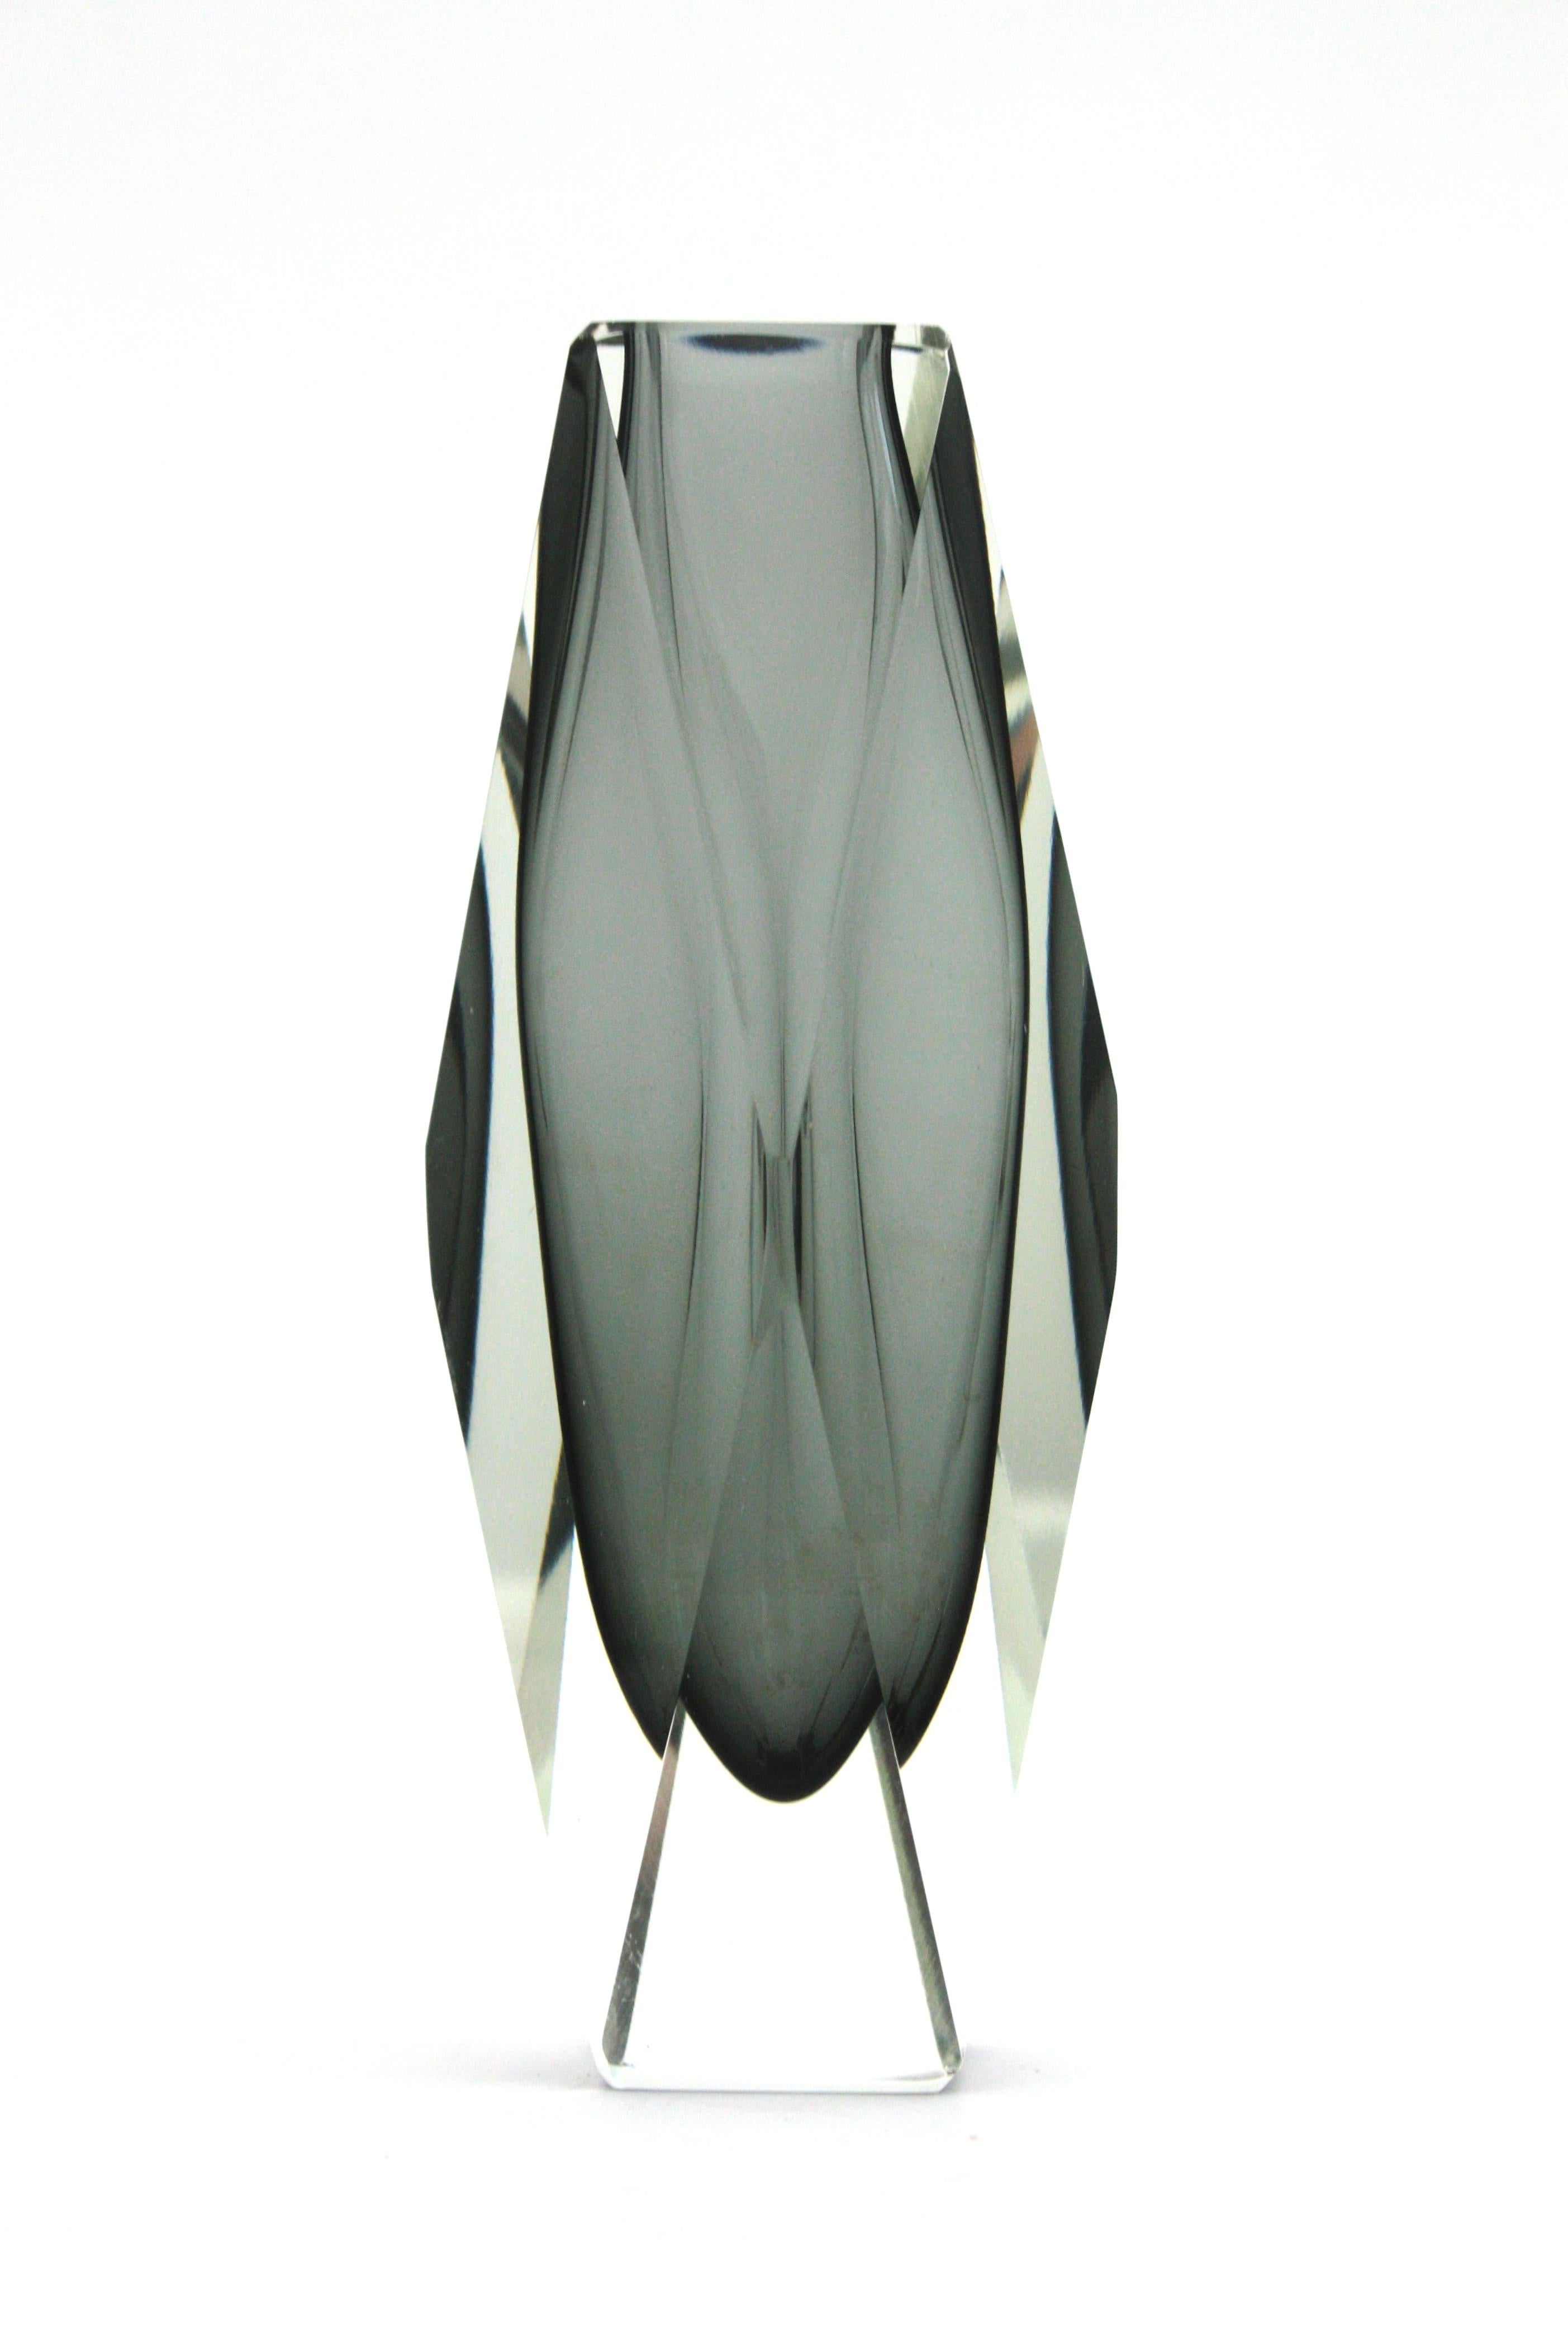 Mandruzzato Murano Sommerso Smoked Grey Clear Faceted Art Glass Vase For Sale 3